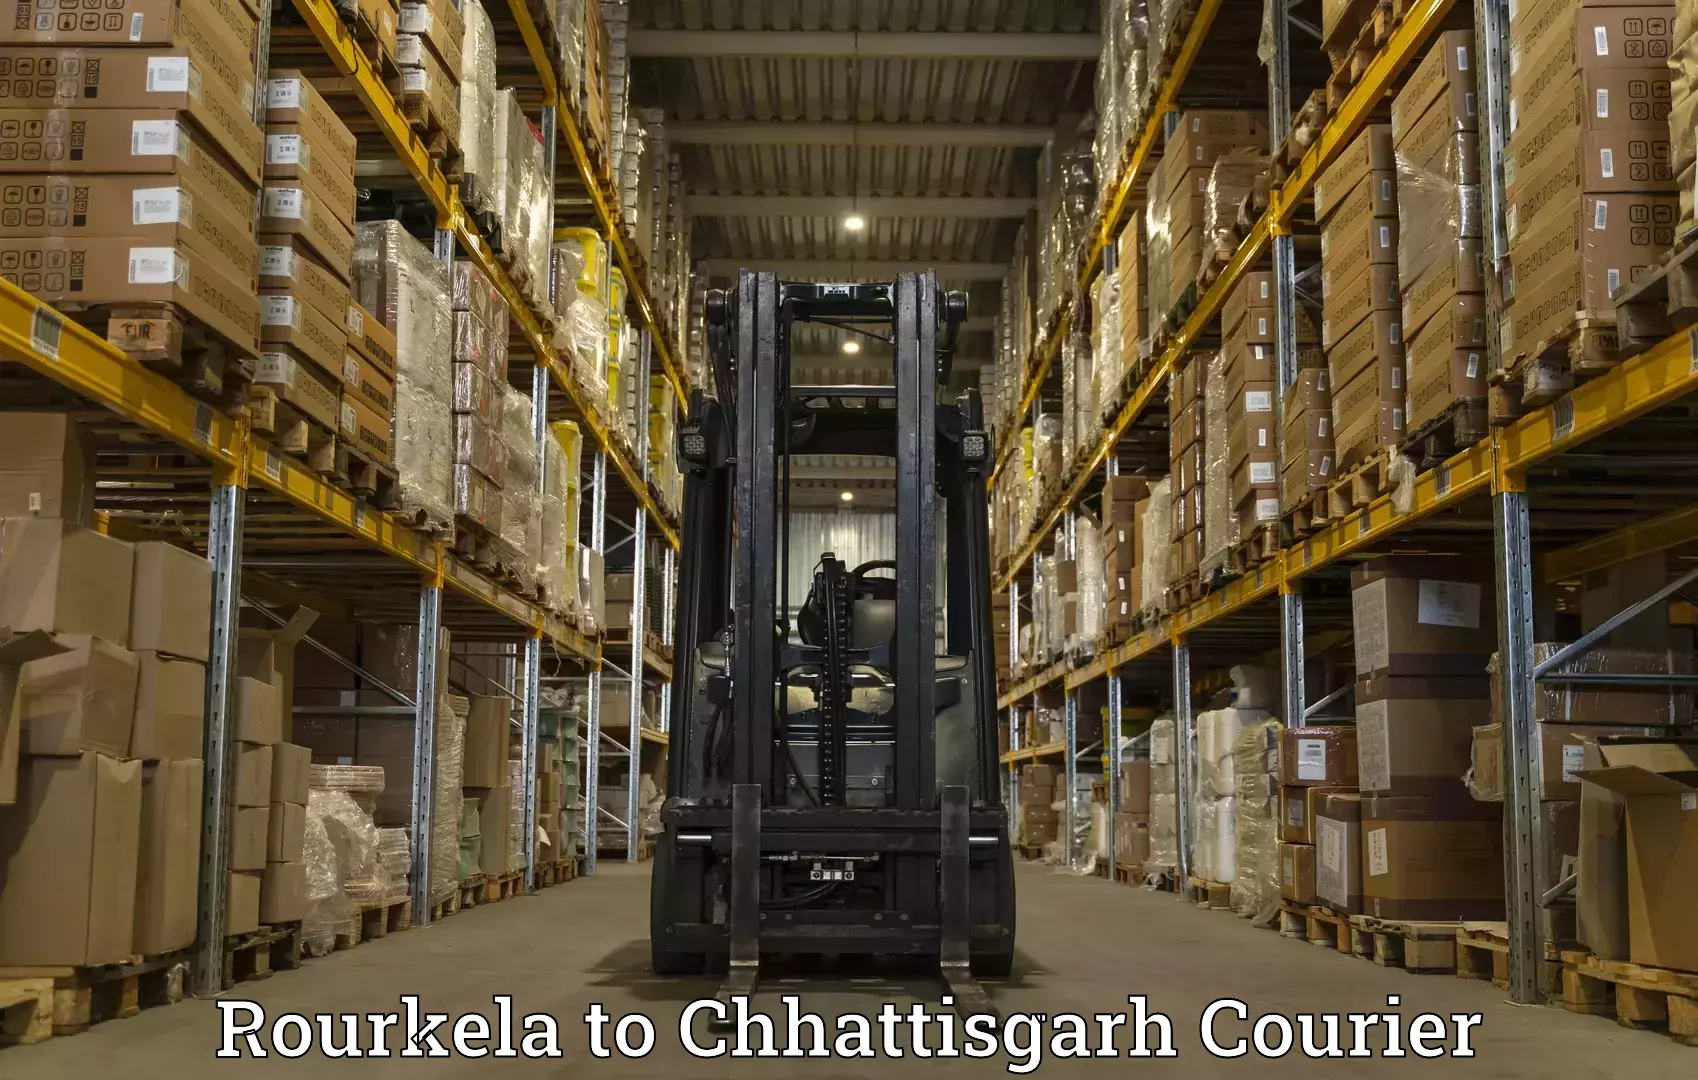 Package delivery network Rourkela to IIT Bhilai